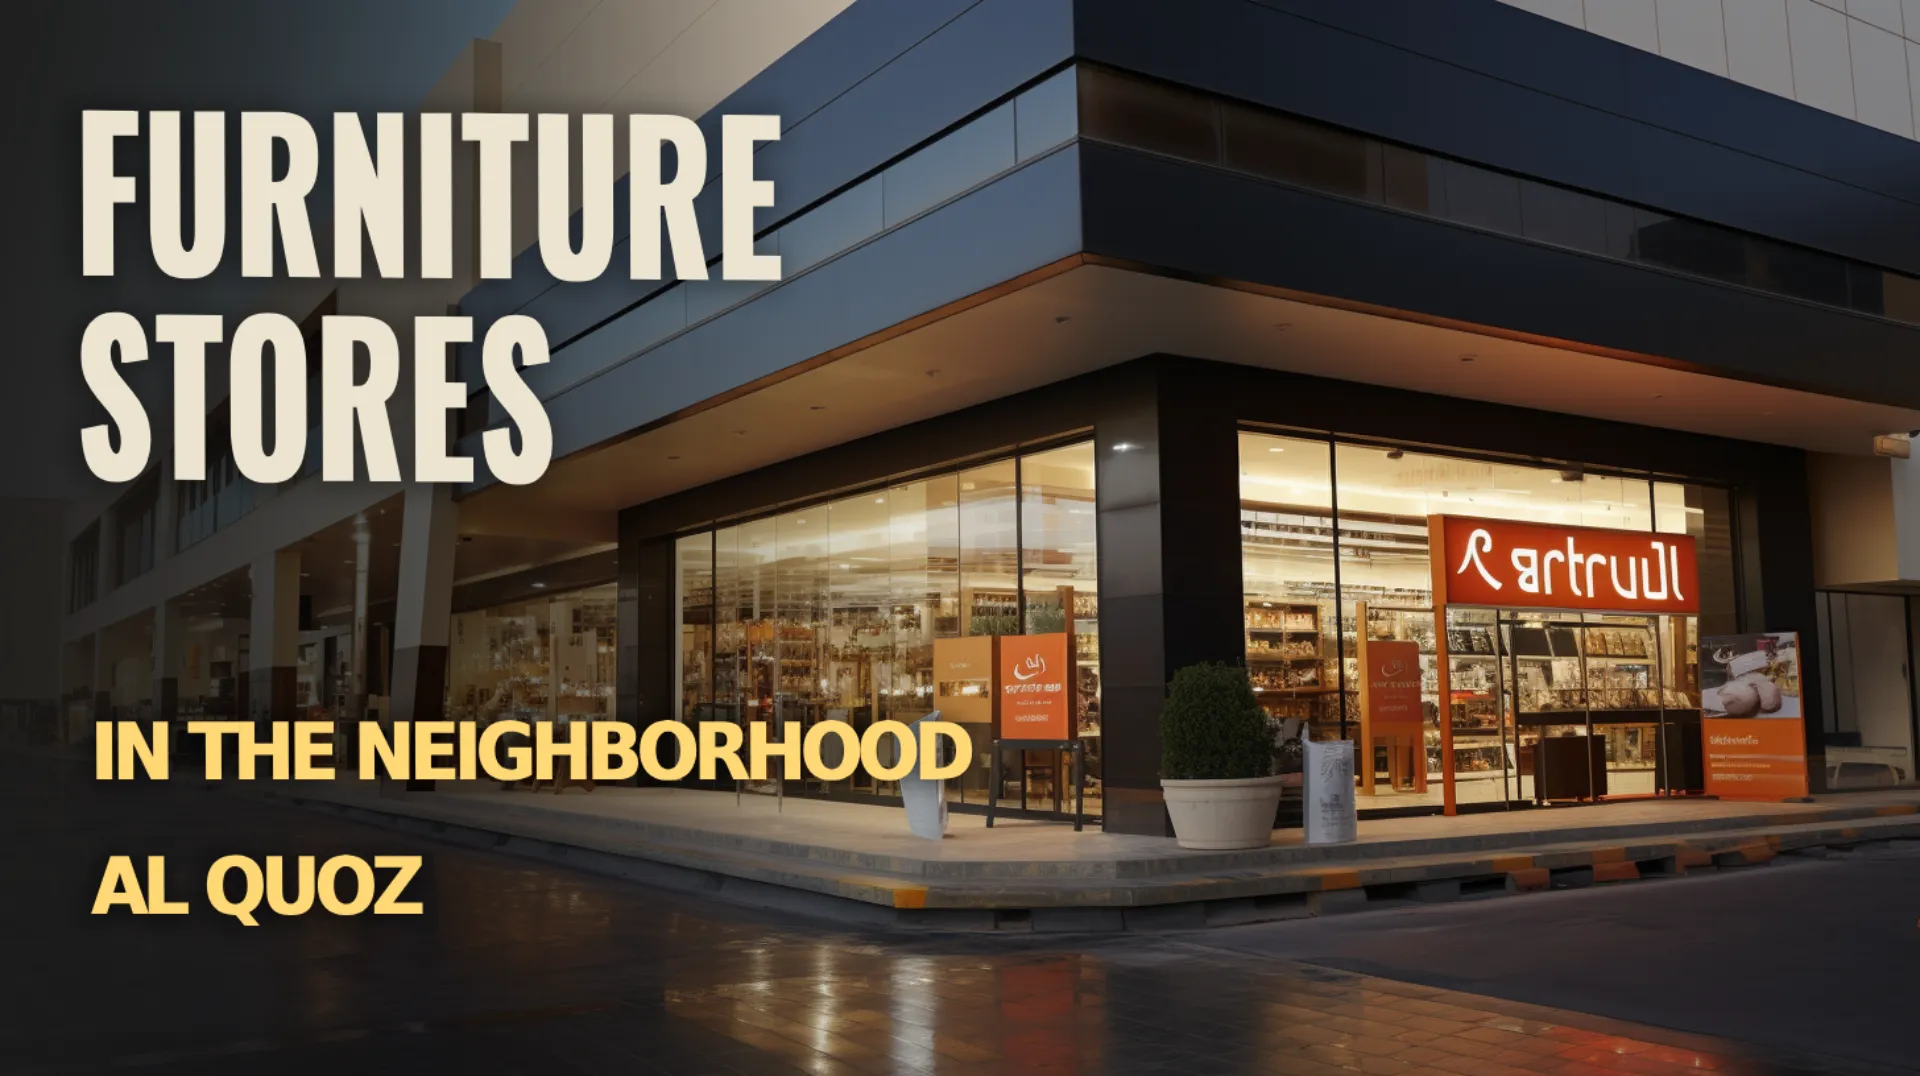 Furniture Stores in Al Quoz - Explore a Variety of Stylish Options